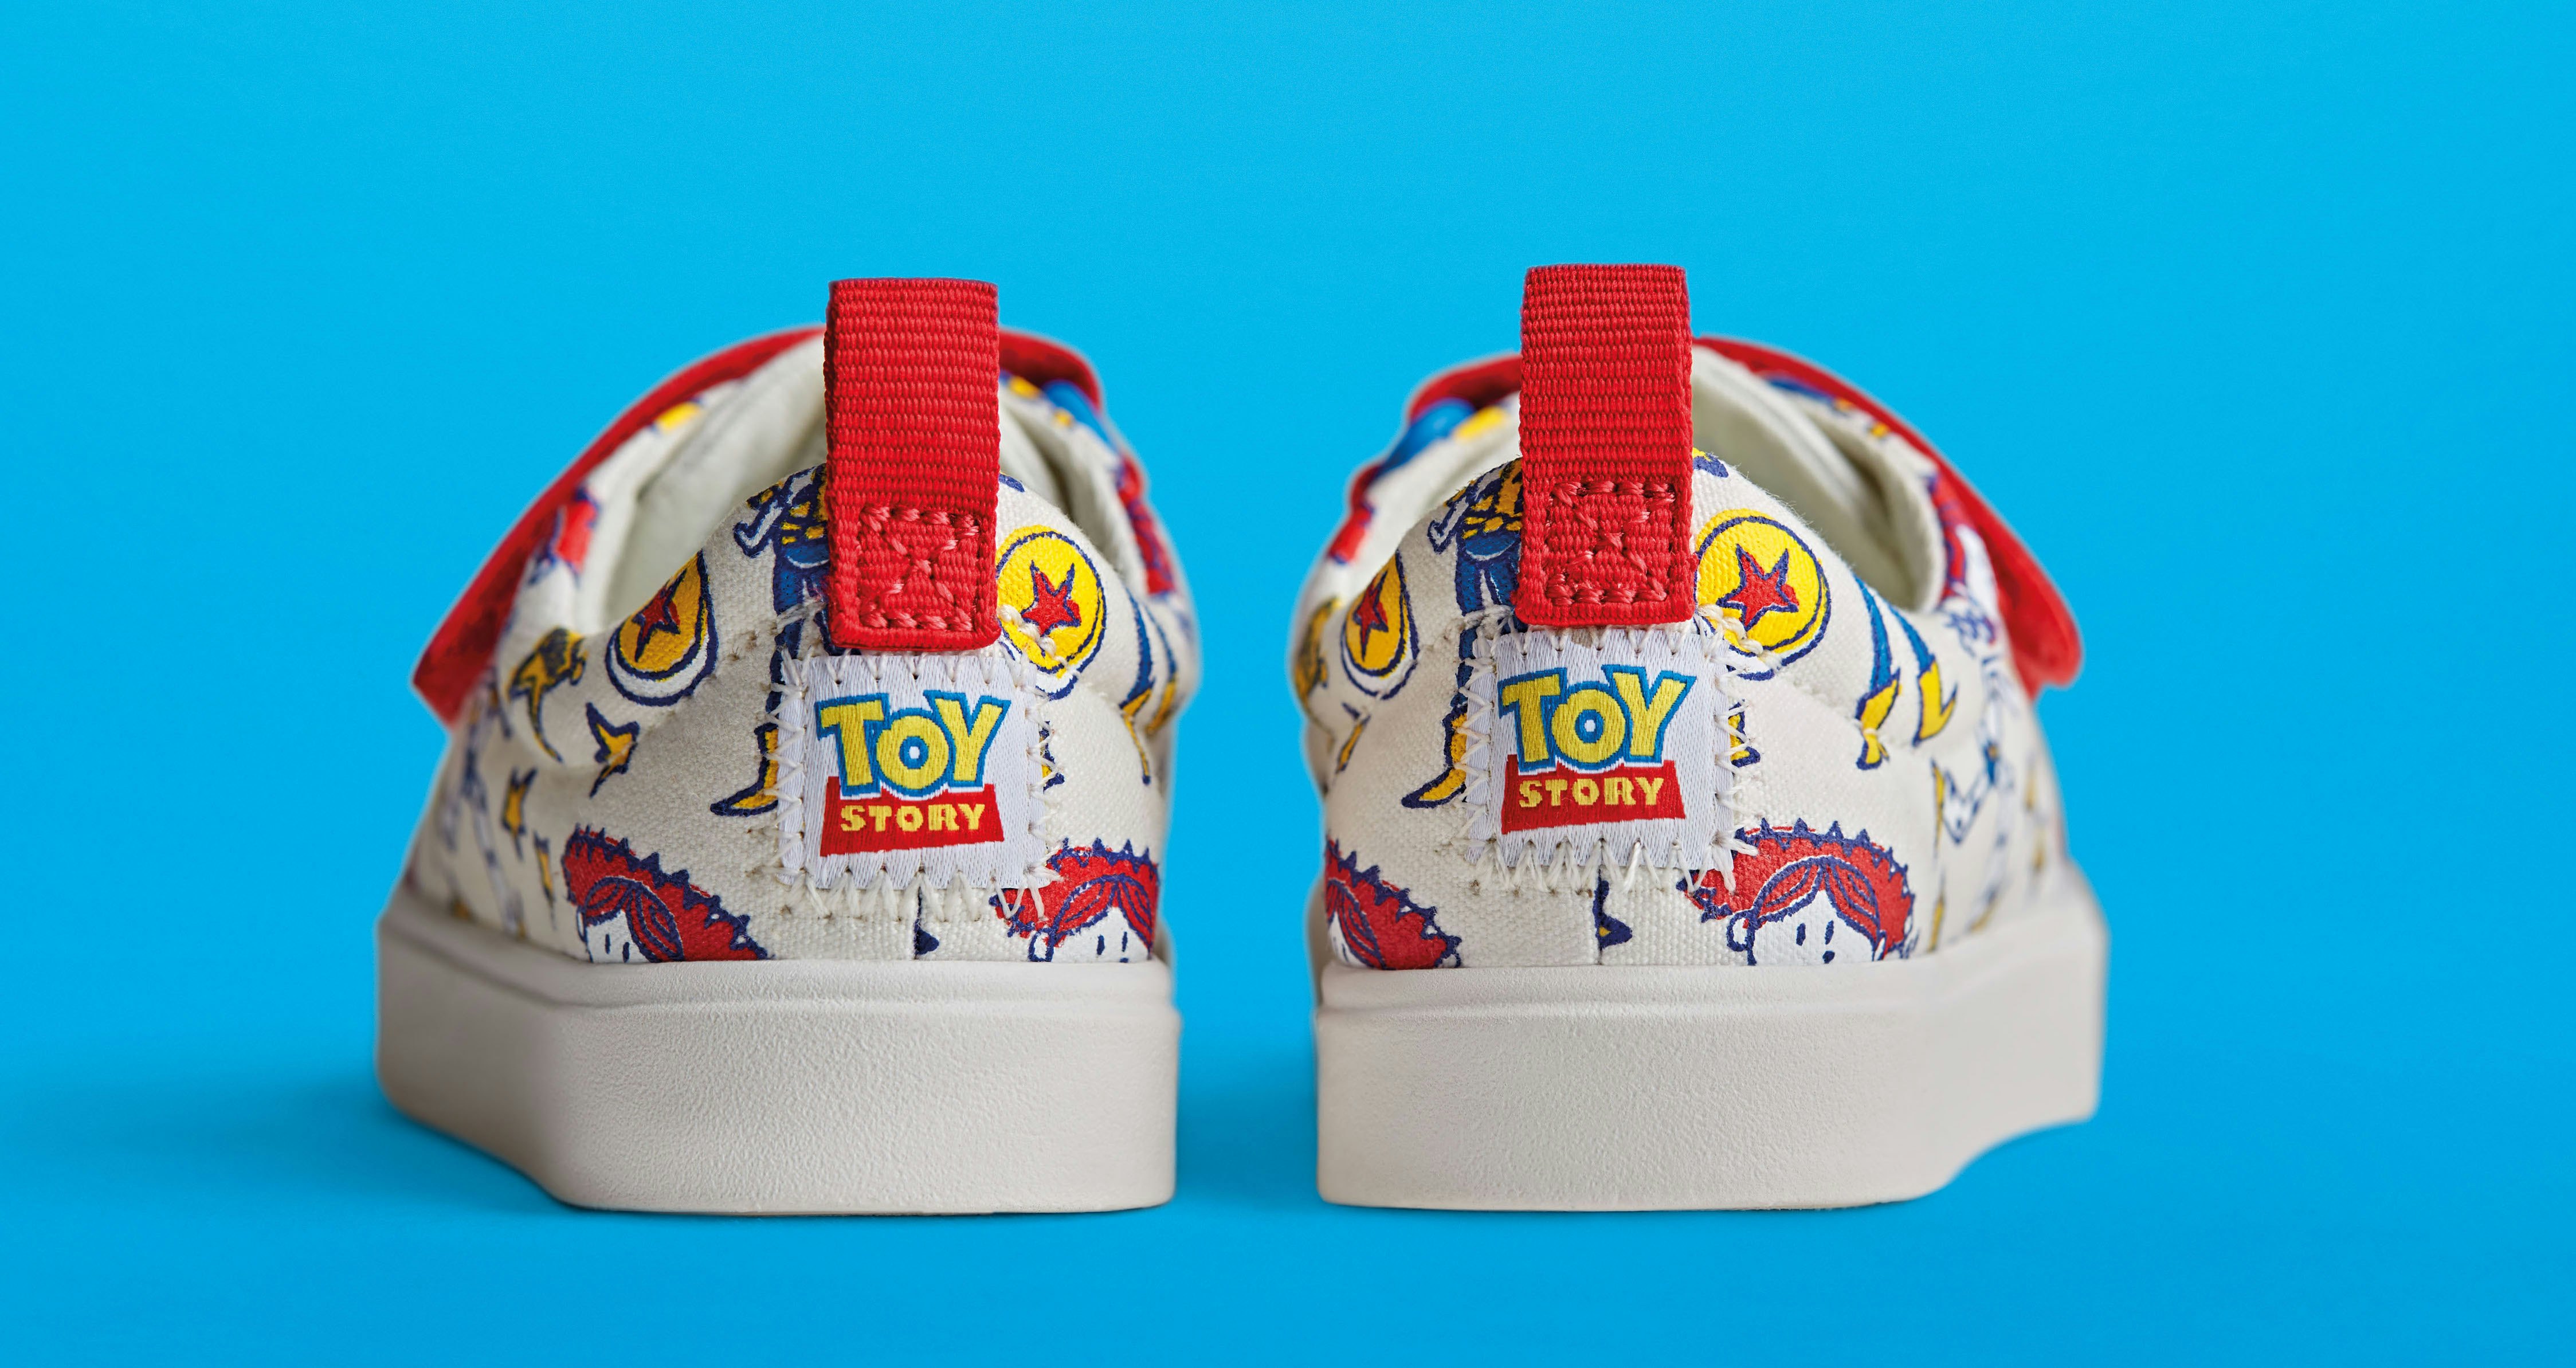 clarks toy story shoes